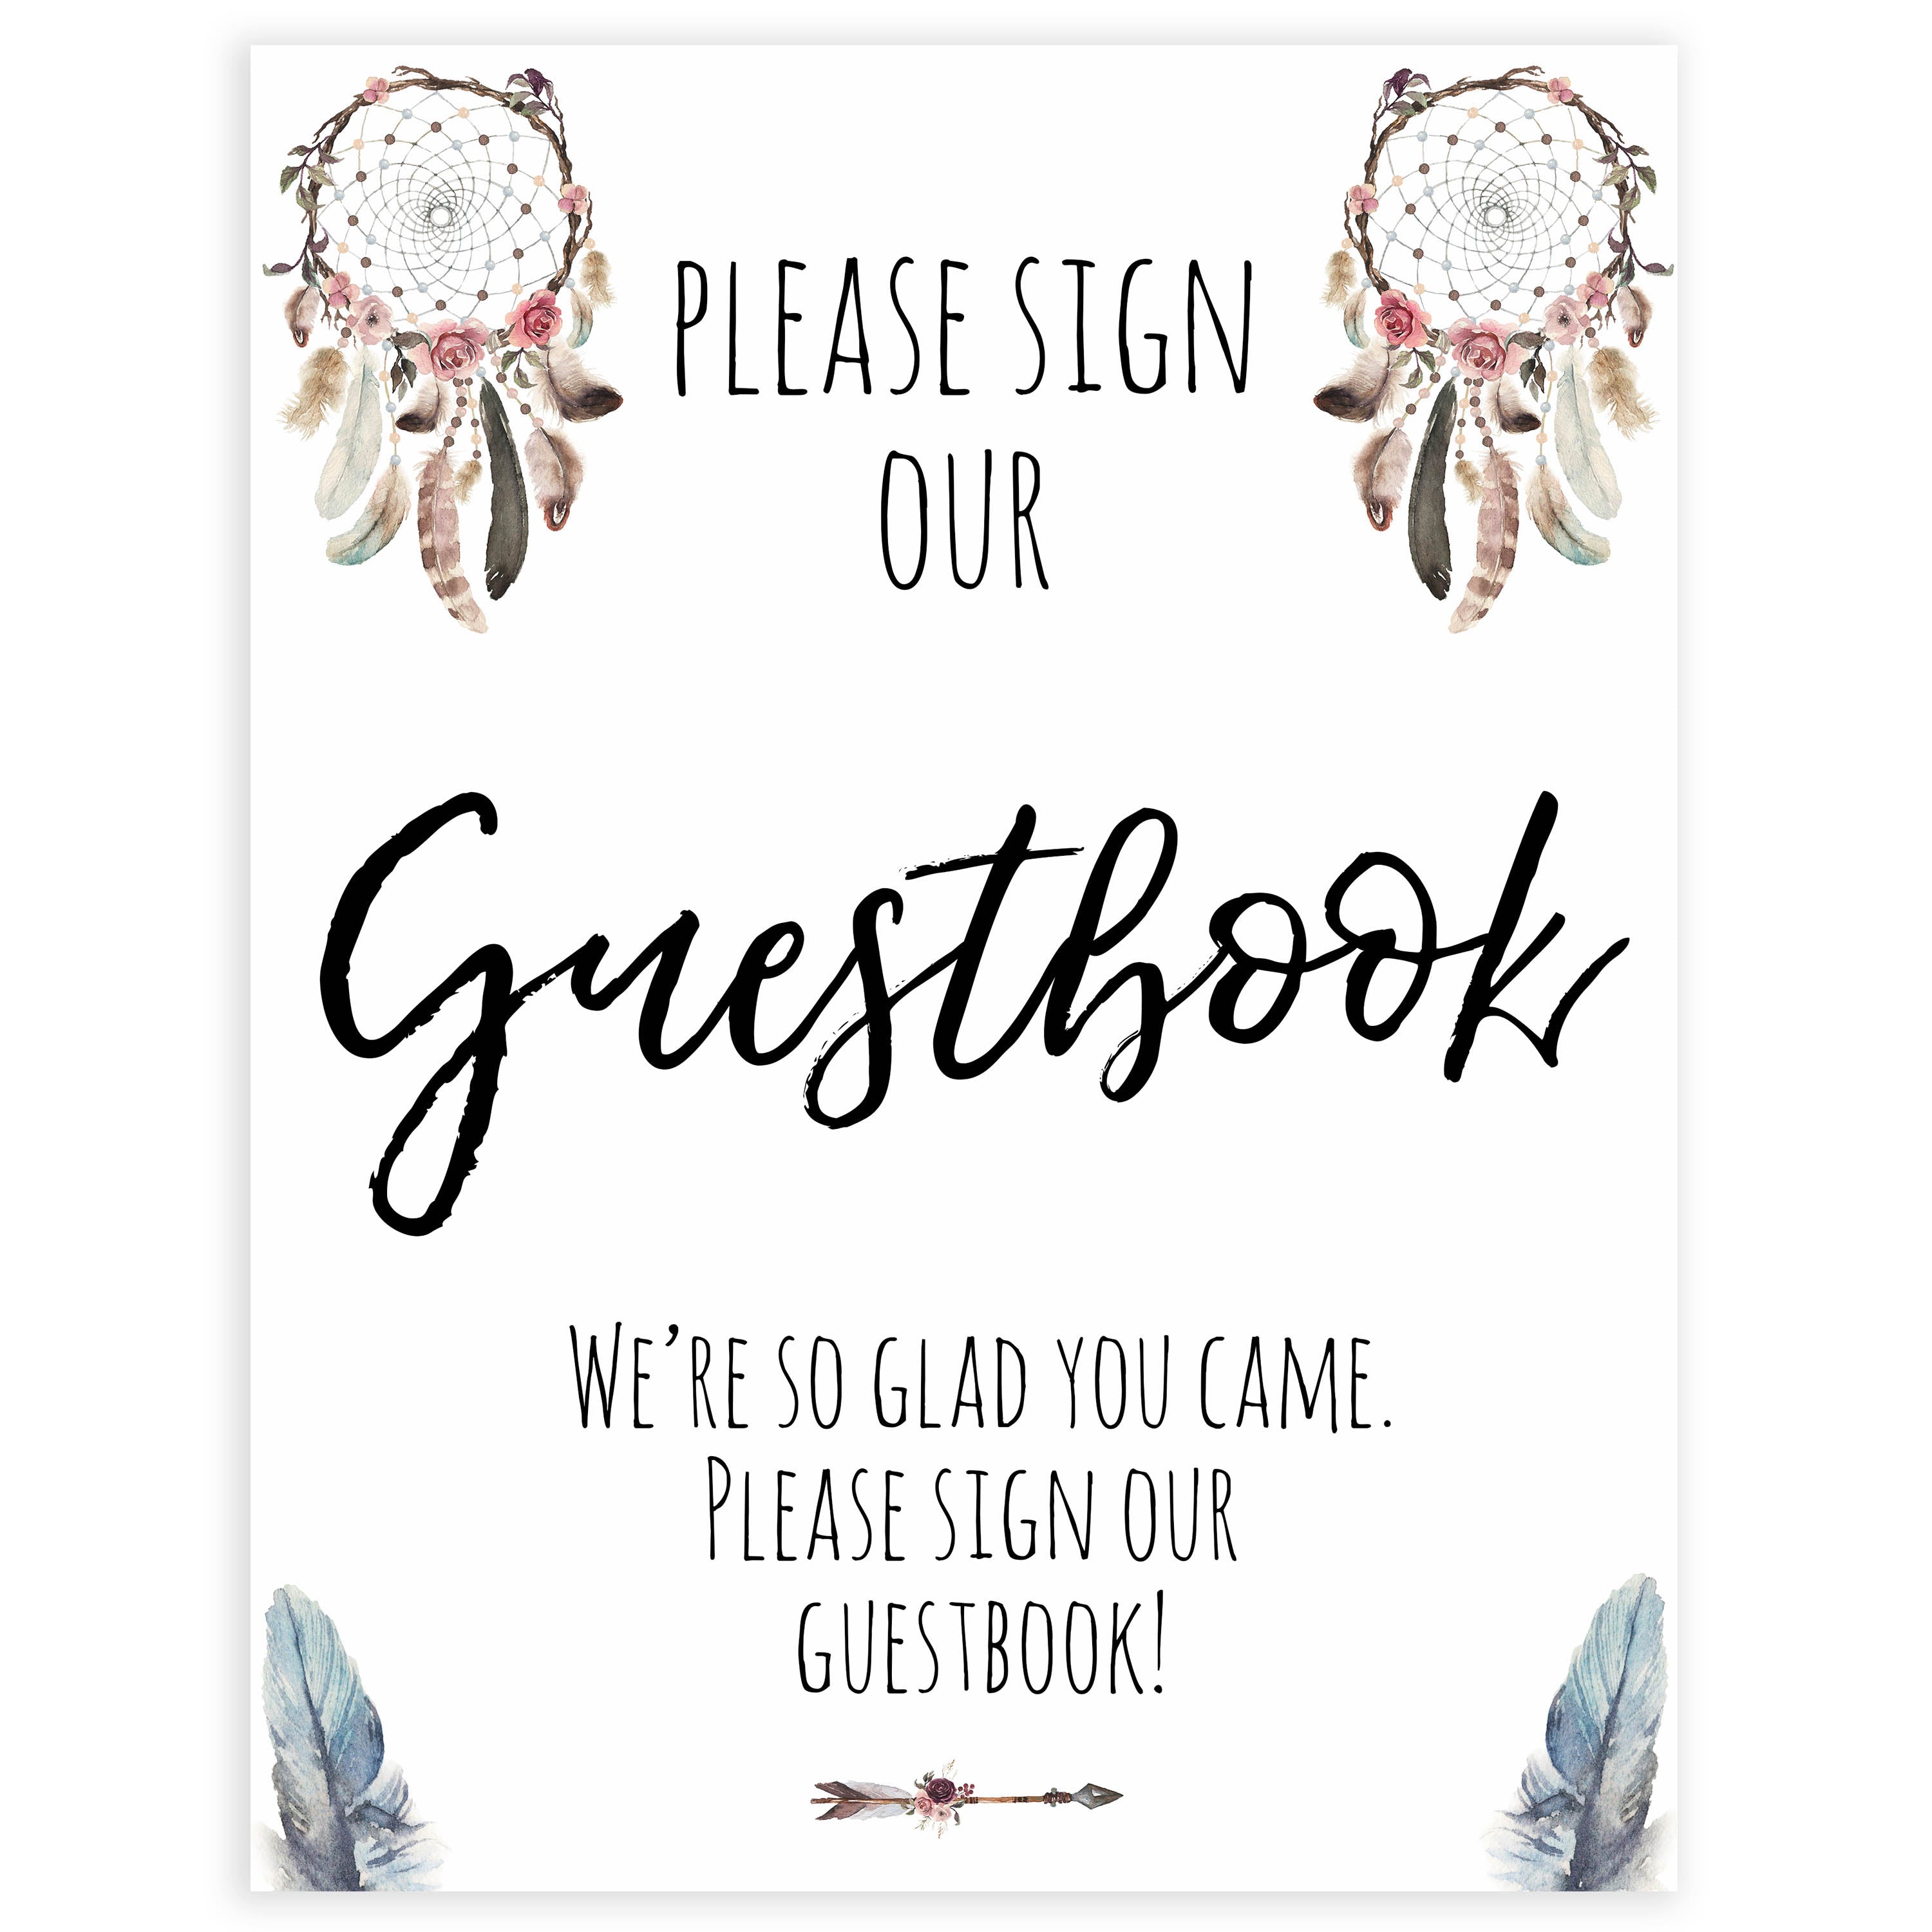 boho baby signs, guestbook baby signs, printable baby signs, boho baby decor, fun baby signs, baby shower signs, baby shower decor